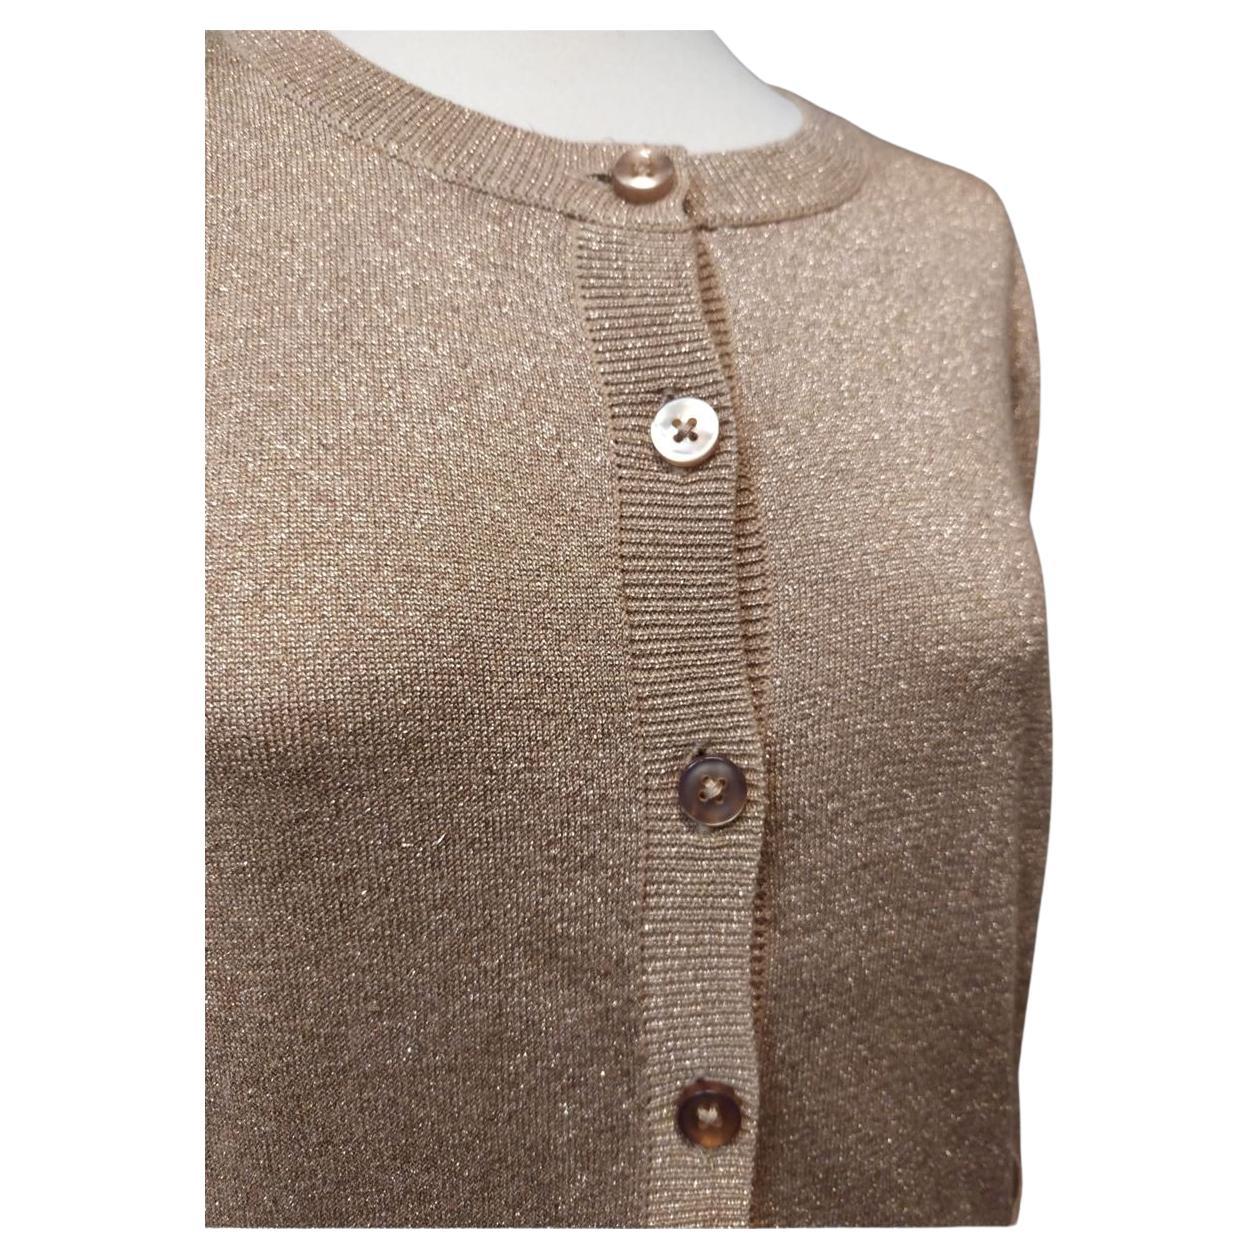 Cotton (56%) Polyamid (29%) Silk (8%) Metal Powder pink color Round neck Buttons closure Two pockets Length shoulder/hem cm 58 (2283 inches) Shoulders cm 355 (1397 inches)
